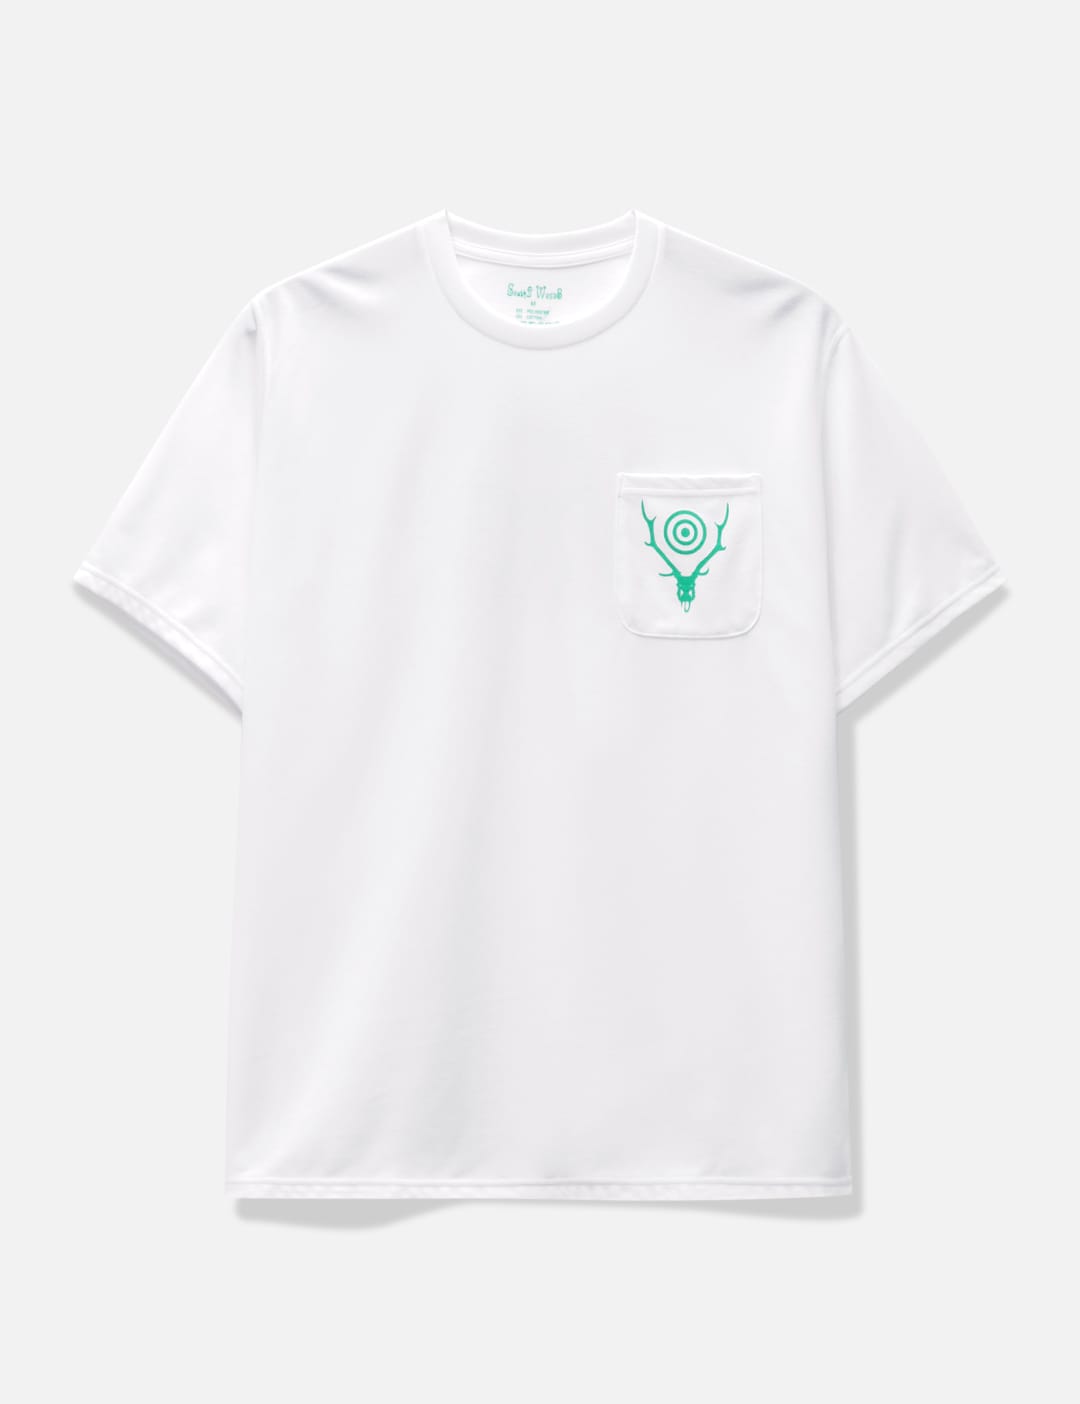 South2 West8 Round Pocket T-shirt